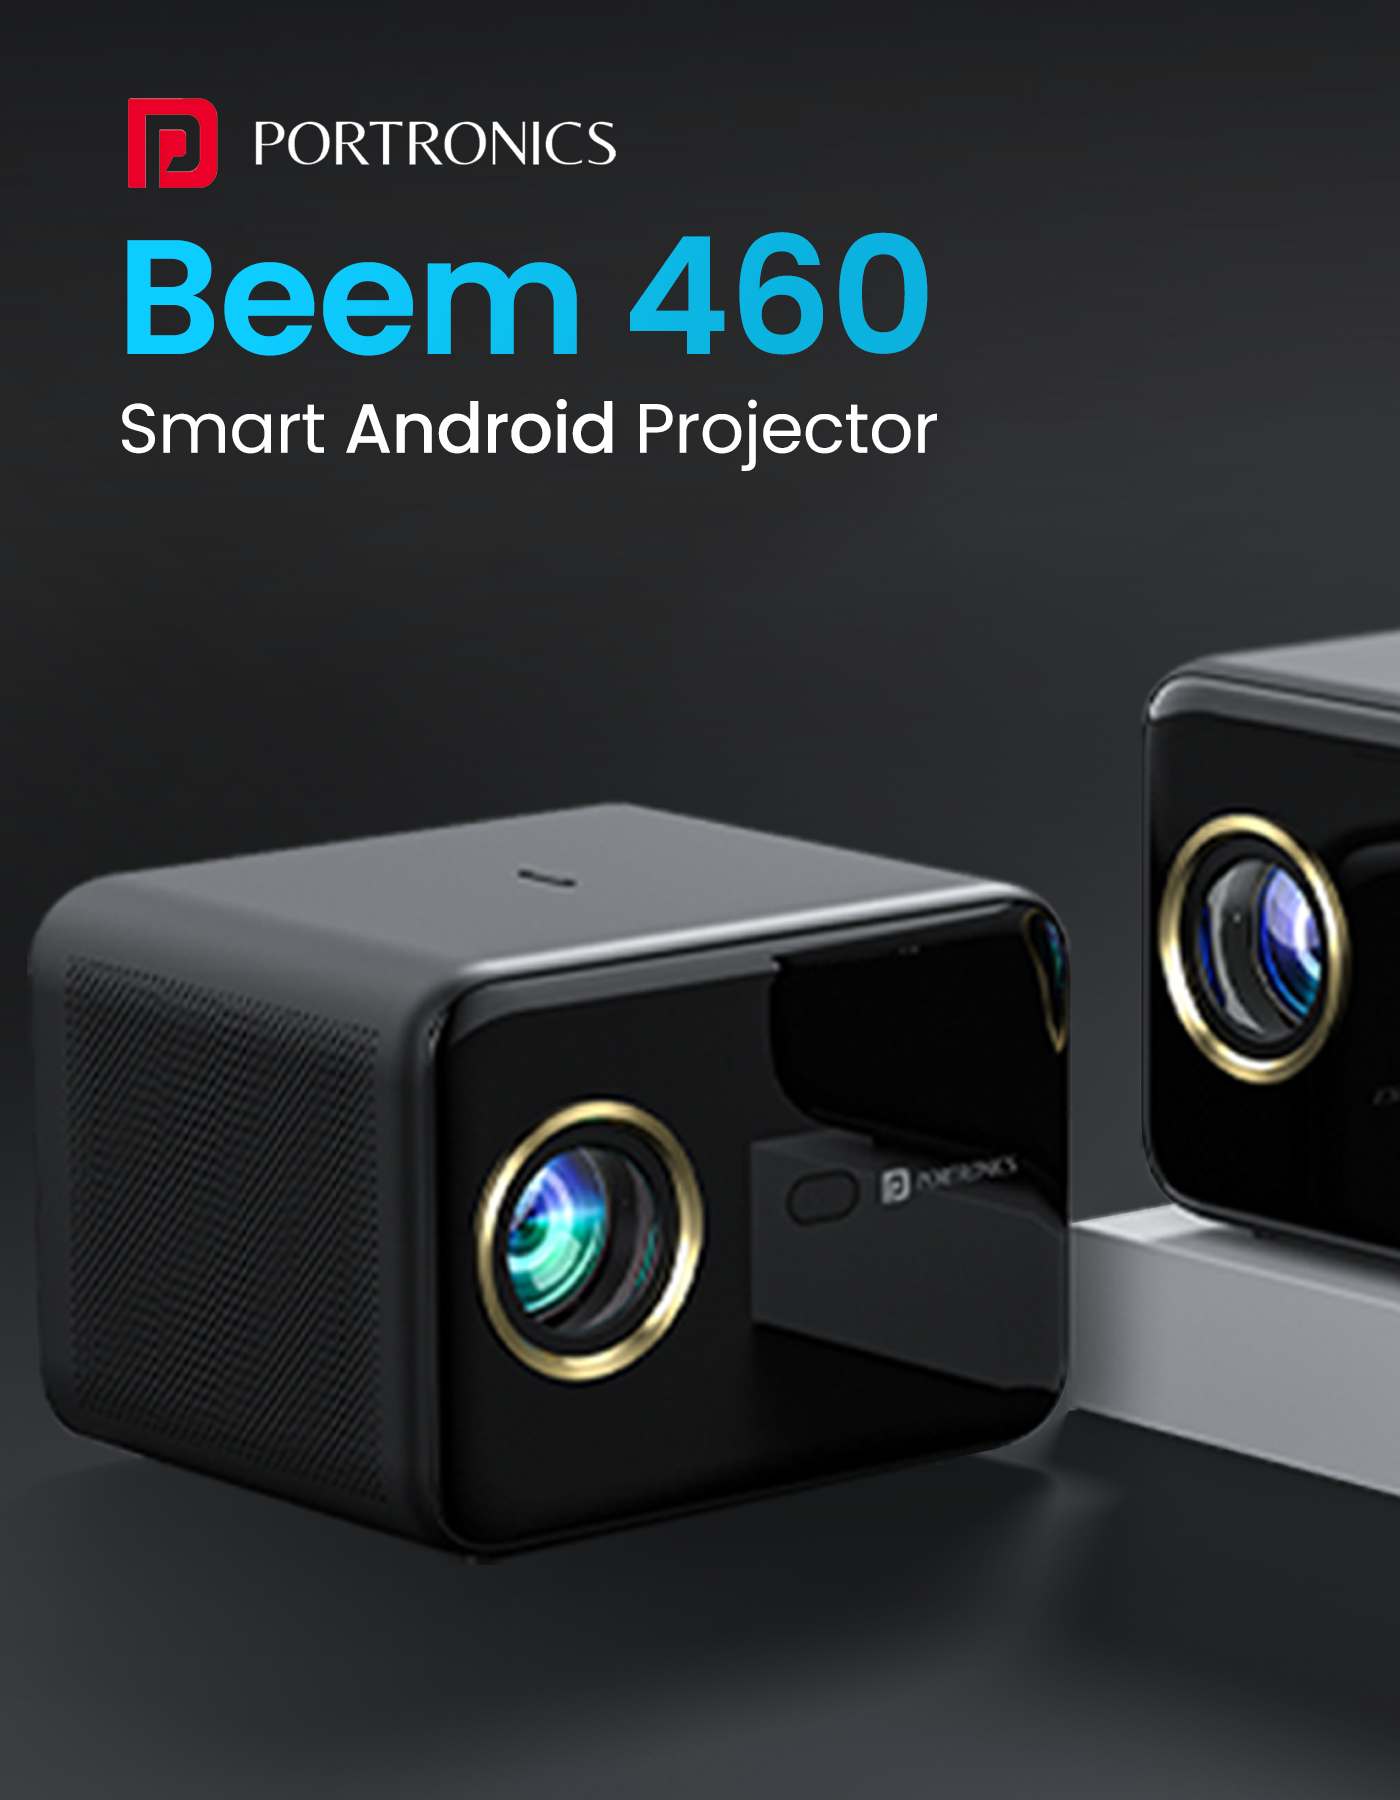 Portronics beem 460| Mini home Projector Full-HD | Portable projector for home with Wi-fi, HDMI,10Watt speaker